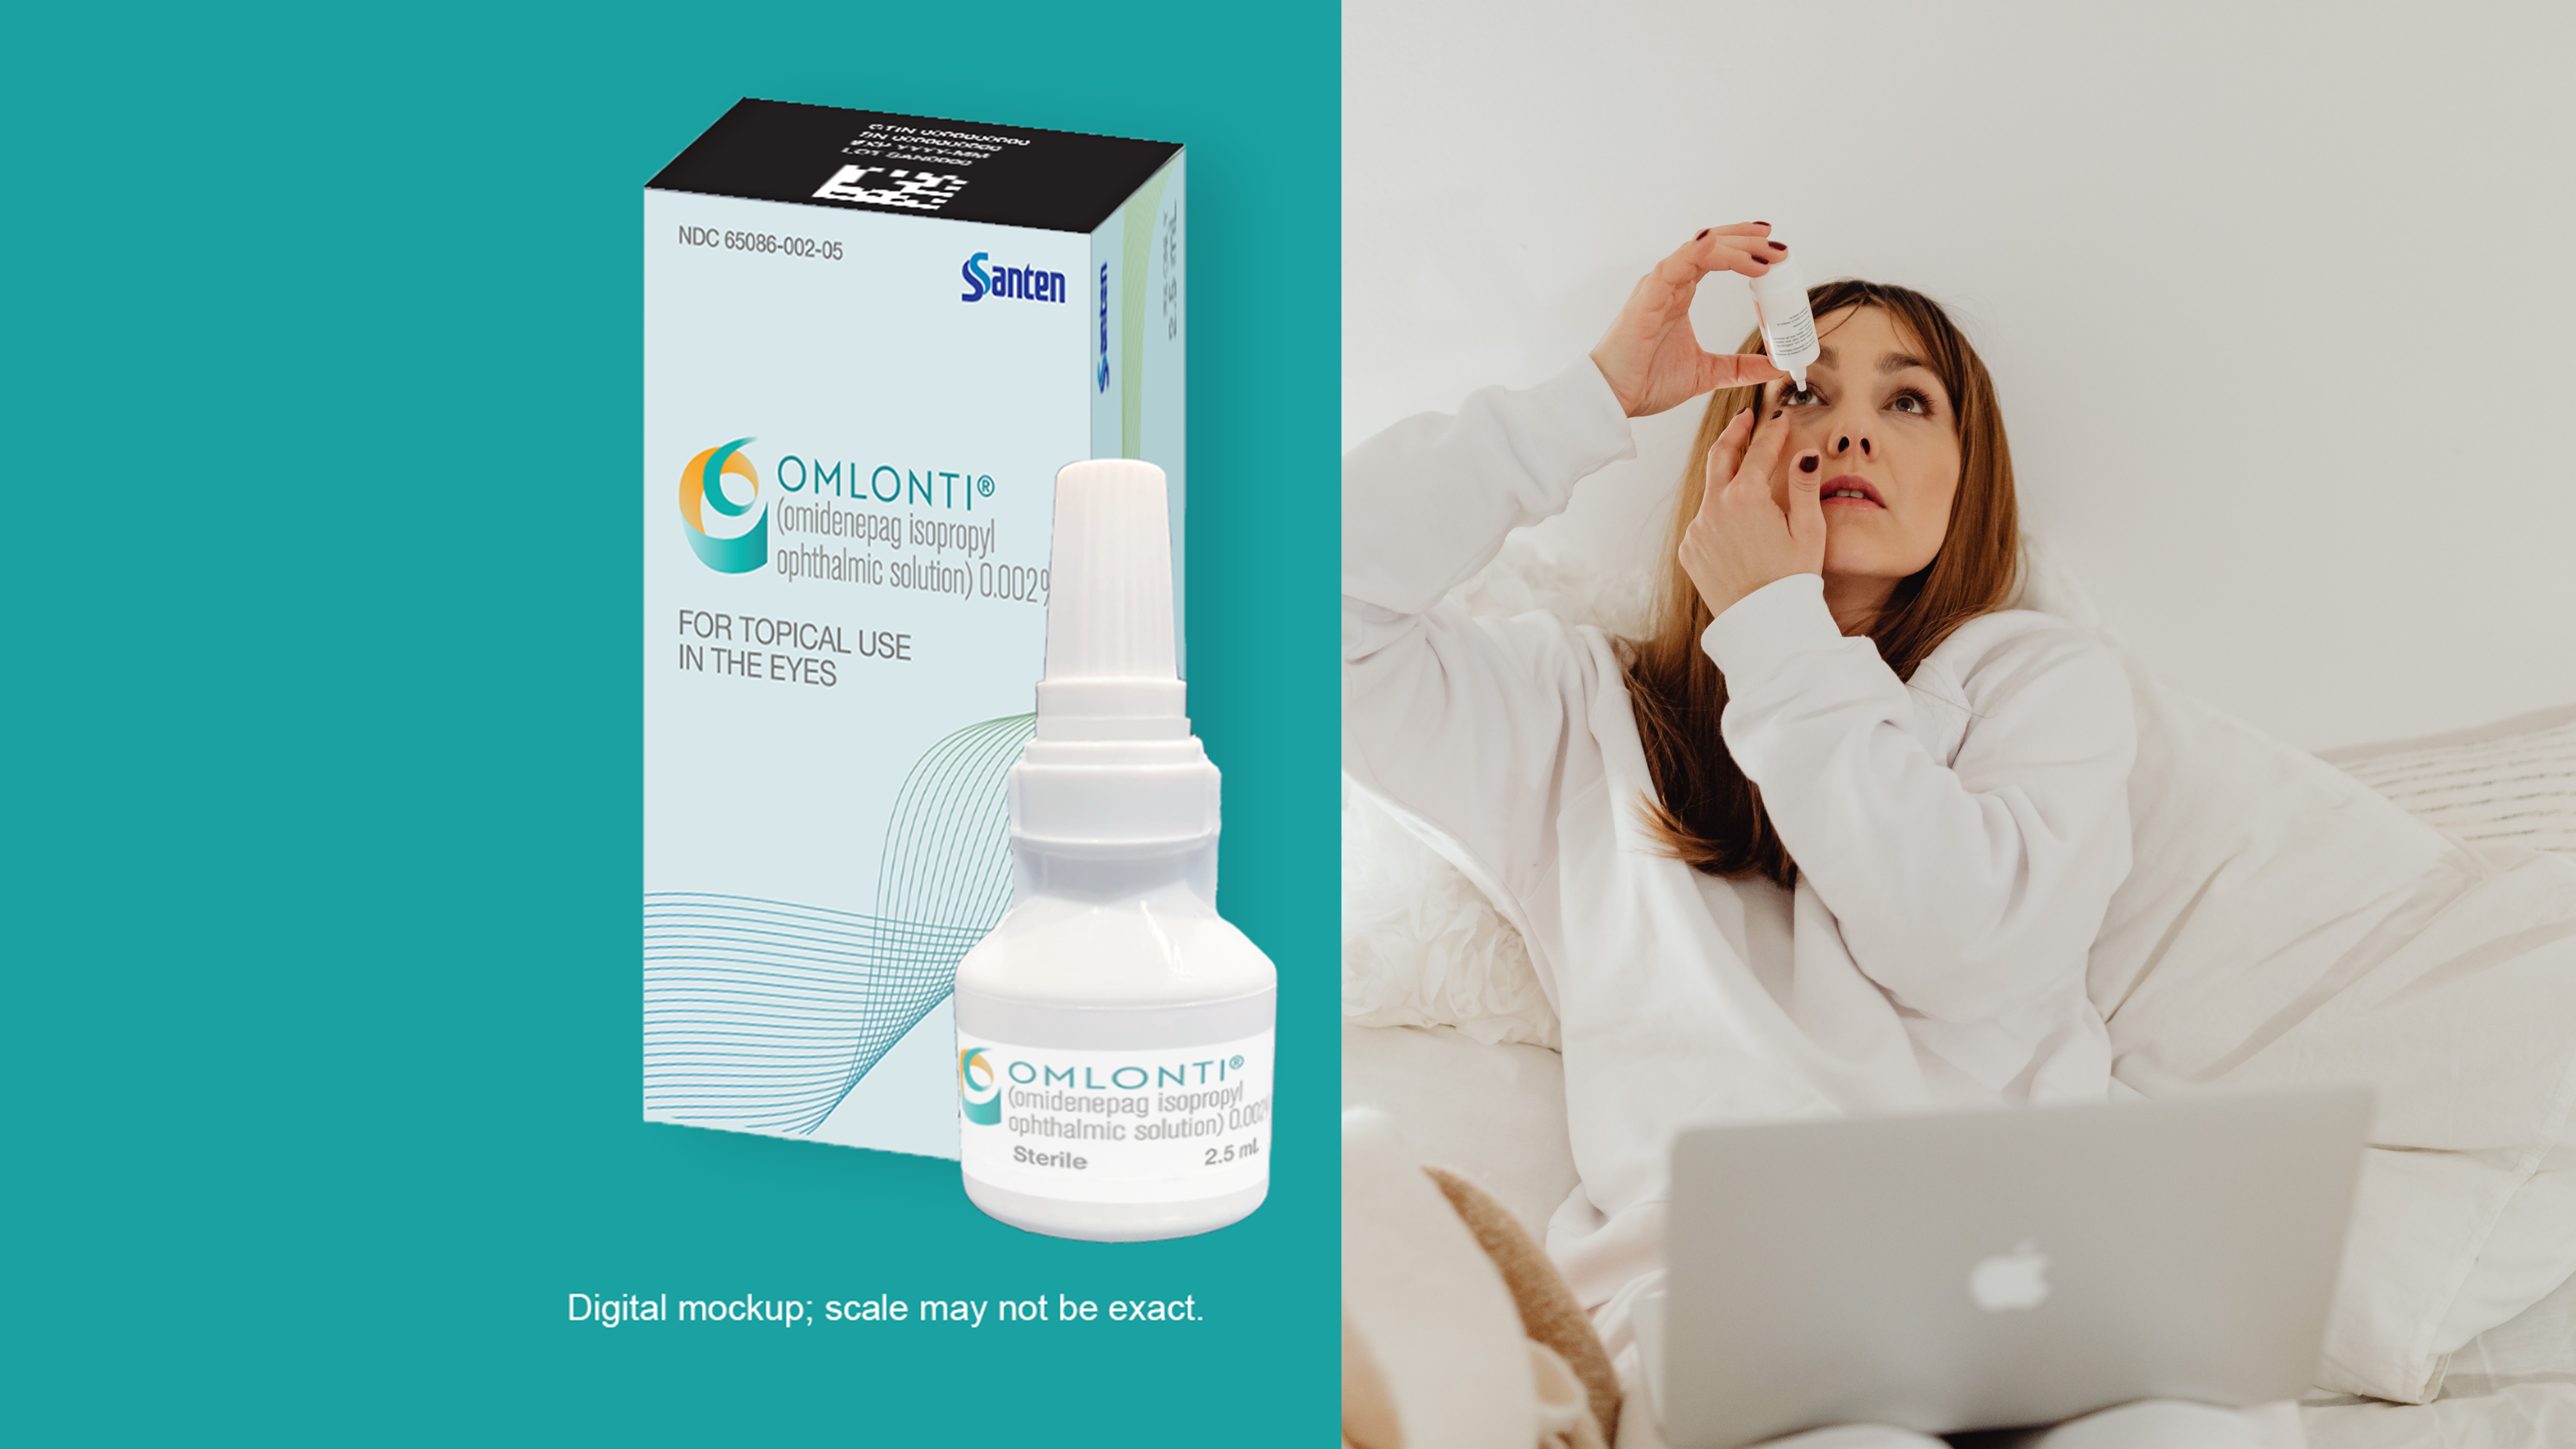 Omlonti eye drops for reducing elevated intraocular pressure (IOP) in patients with primary open-angle glaucoma or ocular hypertension.